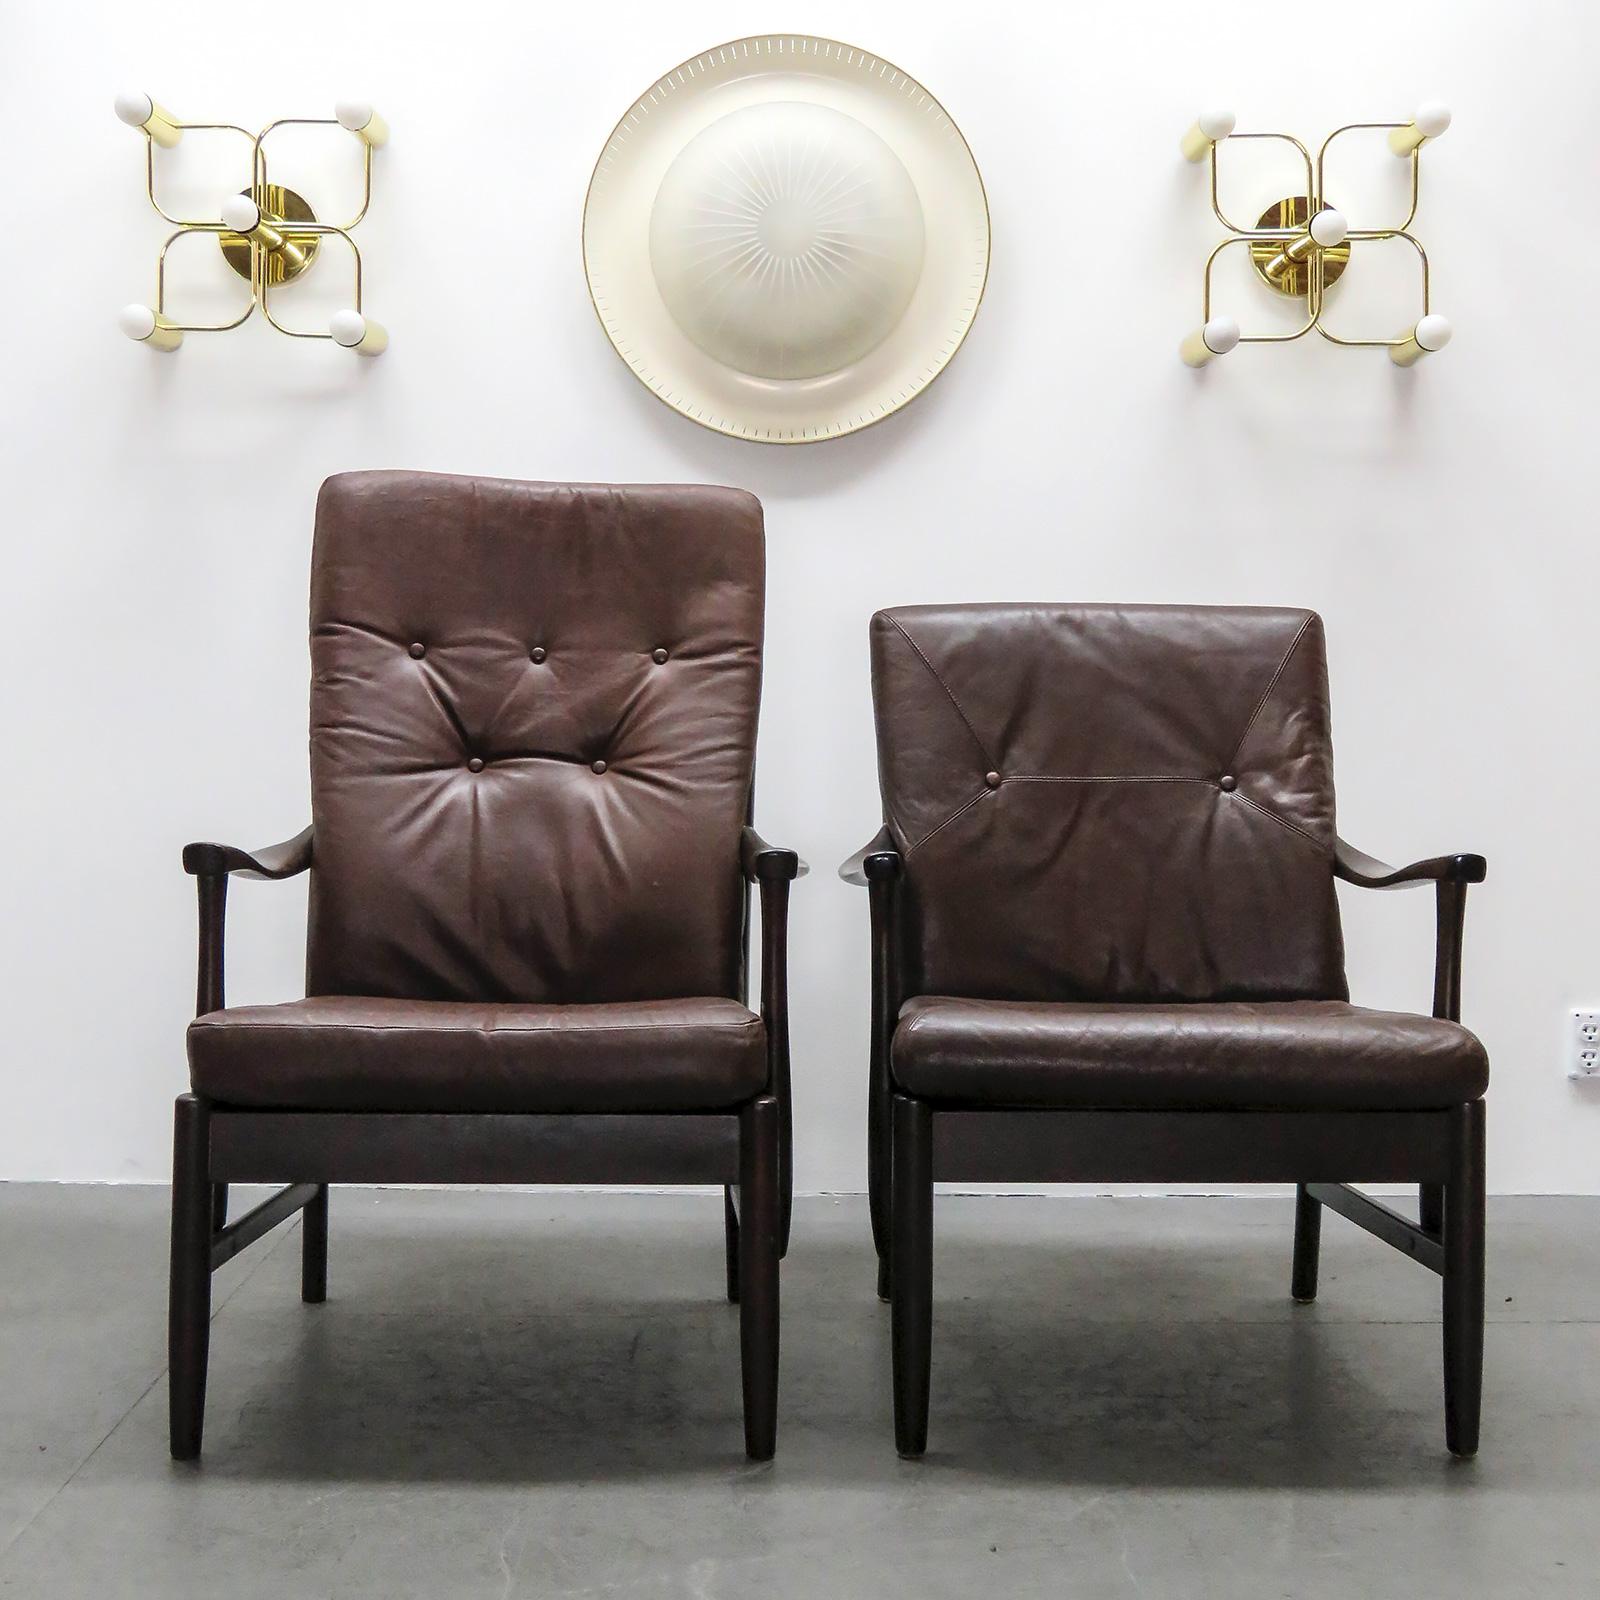 Wonderful set of Danish leather side chairs by Ole Wanscher, matching high and low back versions, solid dark beech frames with chocolate colored, tufted leather cushions, measurements for the high chair, low chair height: 34